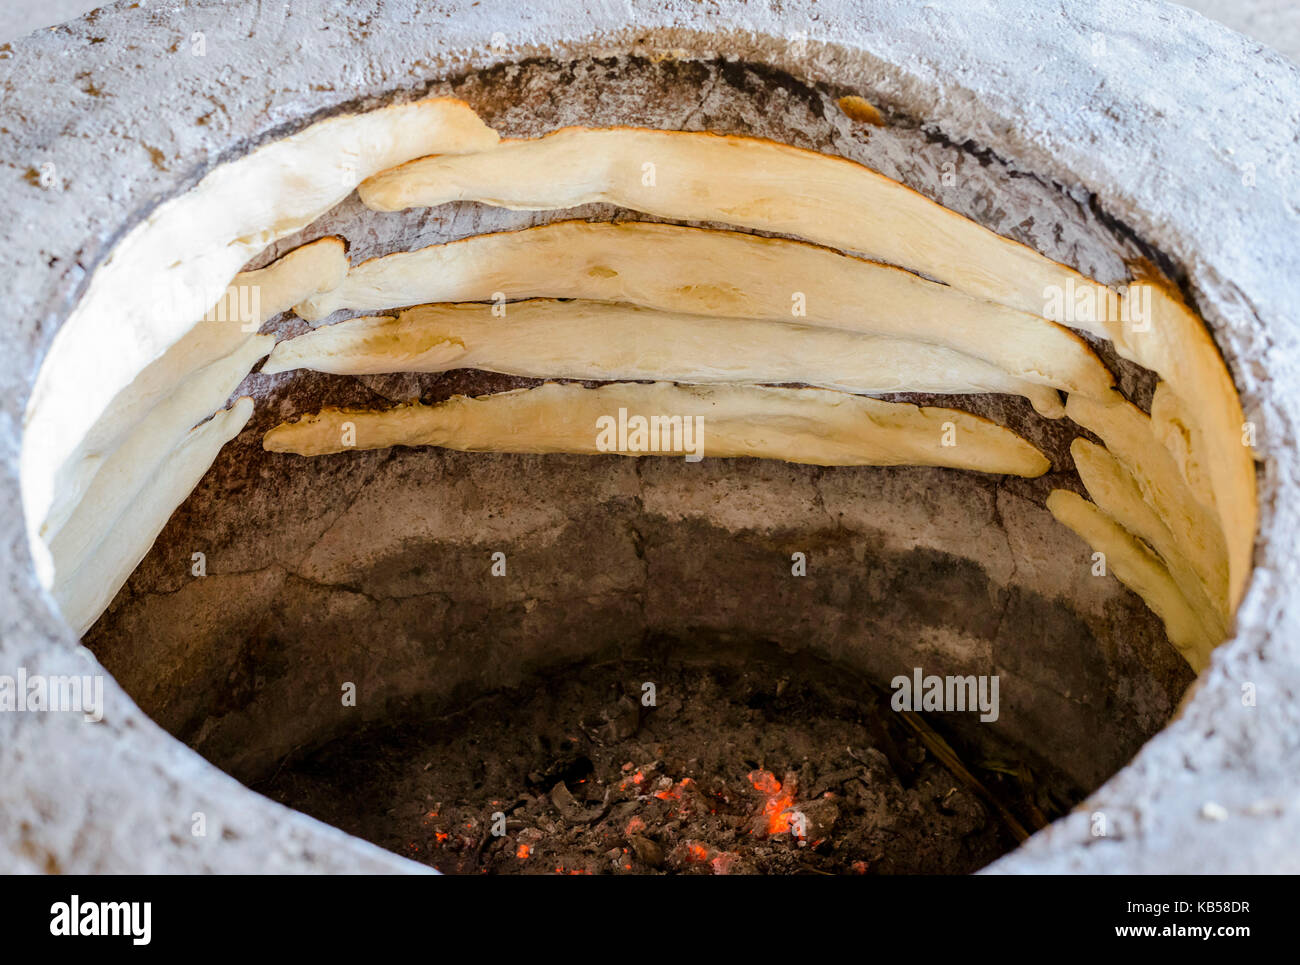 bread, bakery, stove, heat, hole, traditional, ember, delicious Stock Photo